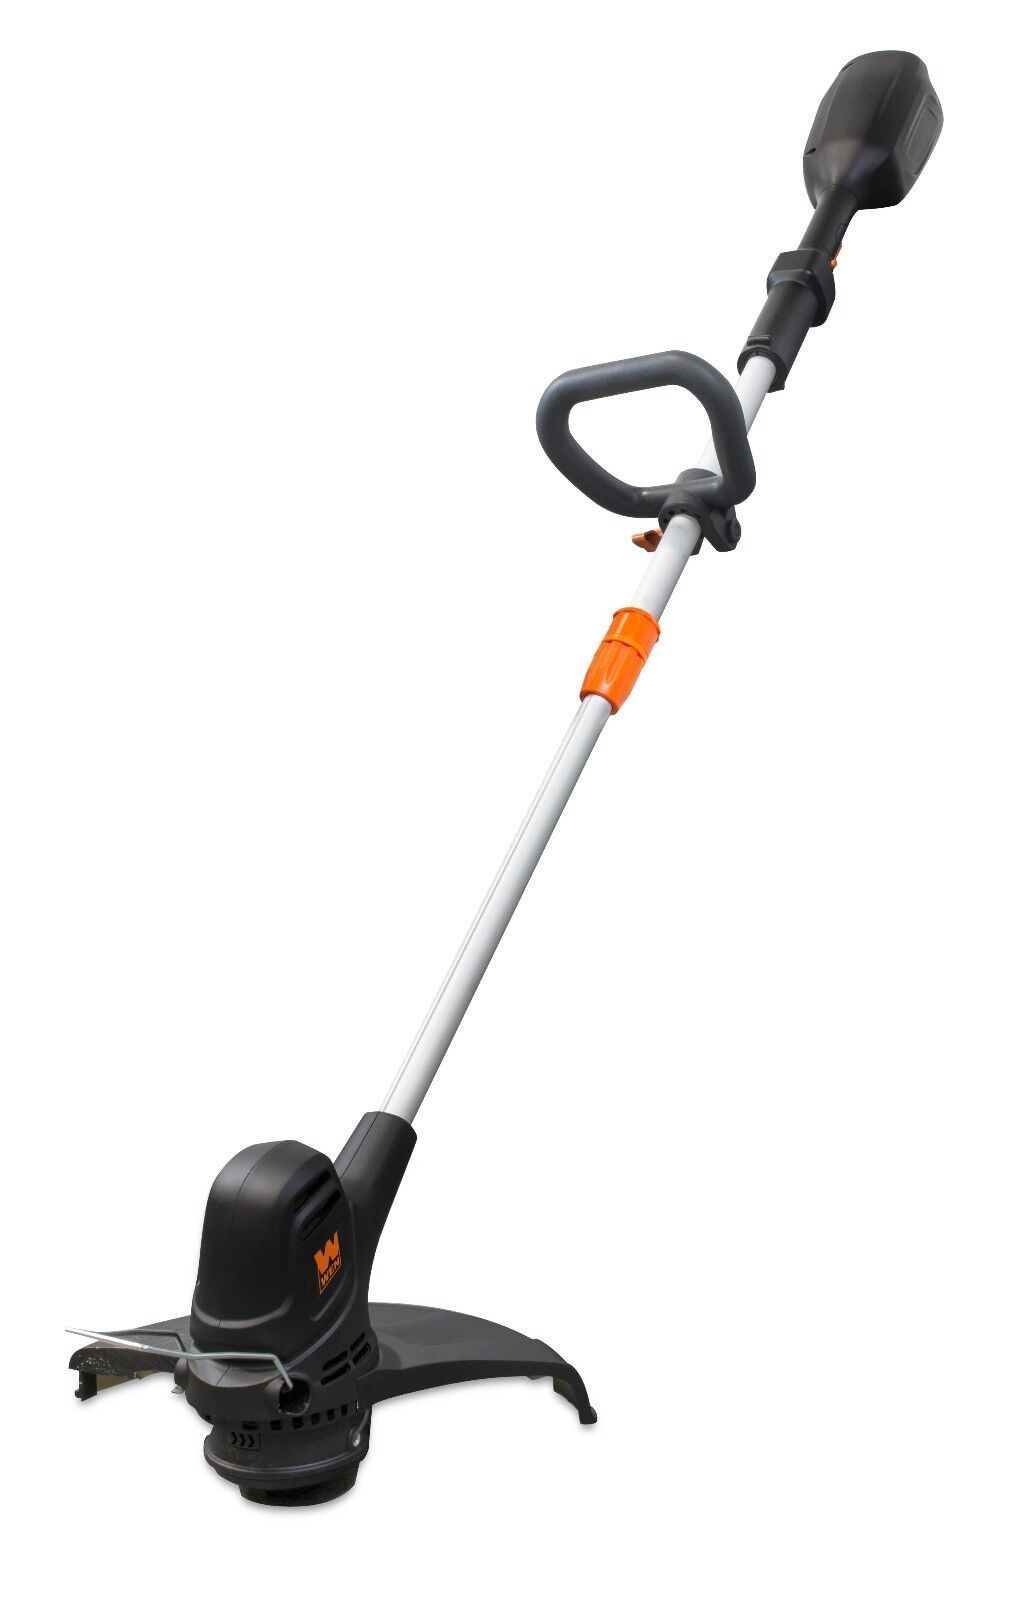 Primary image for Wen 40413 40V Max Lithium-Ion 14-Inch 2-In-1 String Trimmer/Edger W/ 2Ah Battery